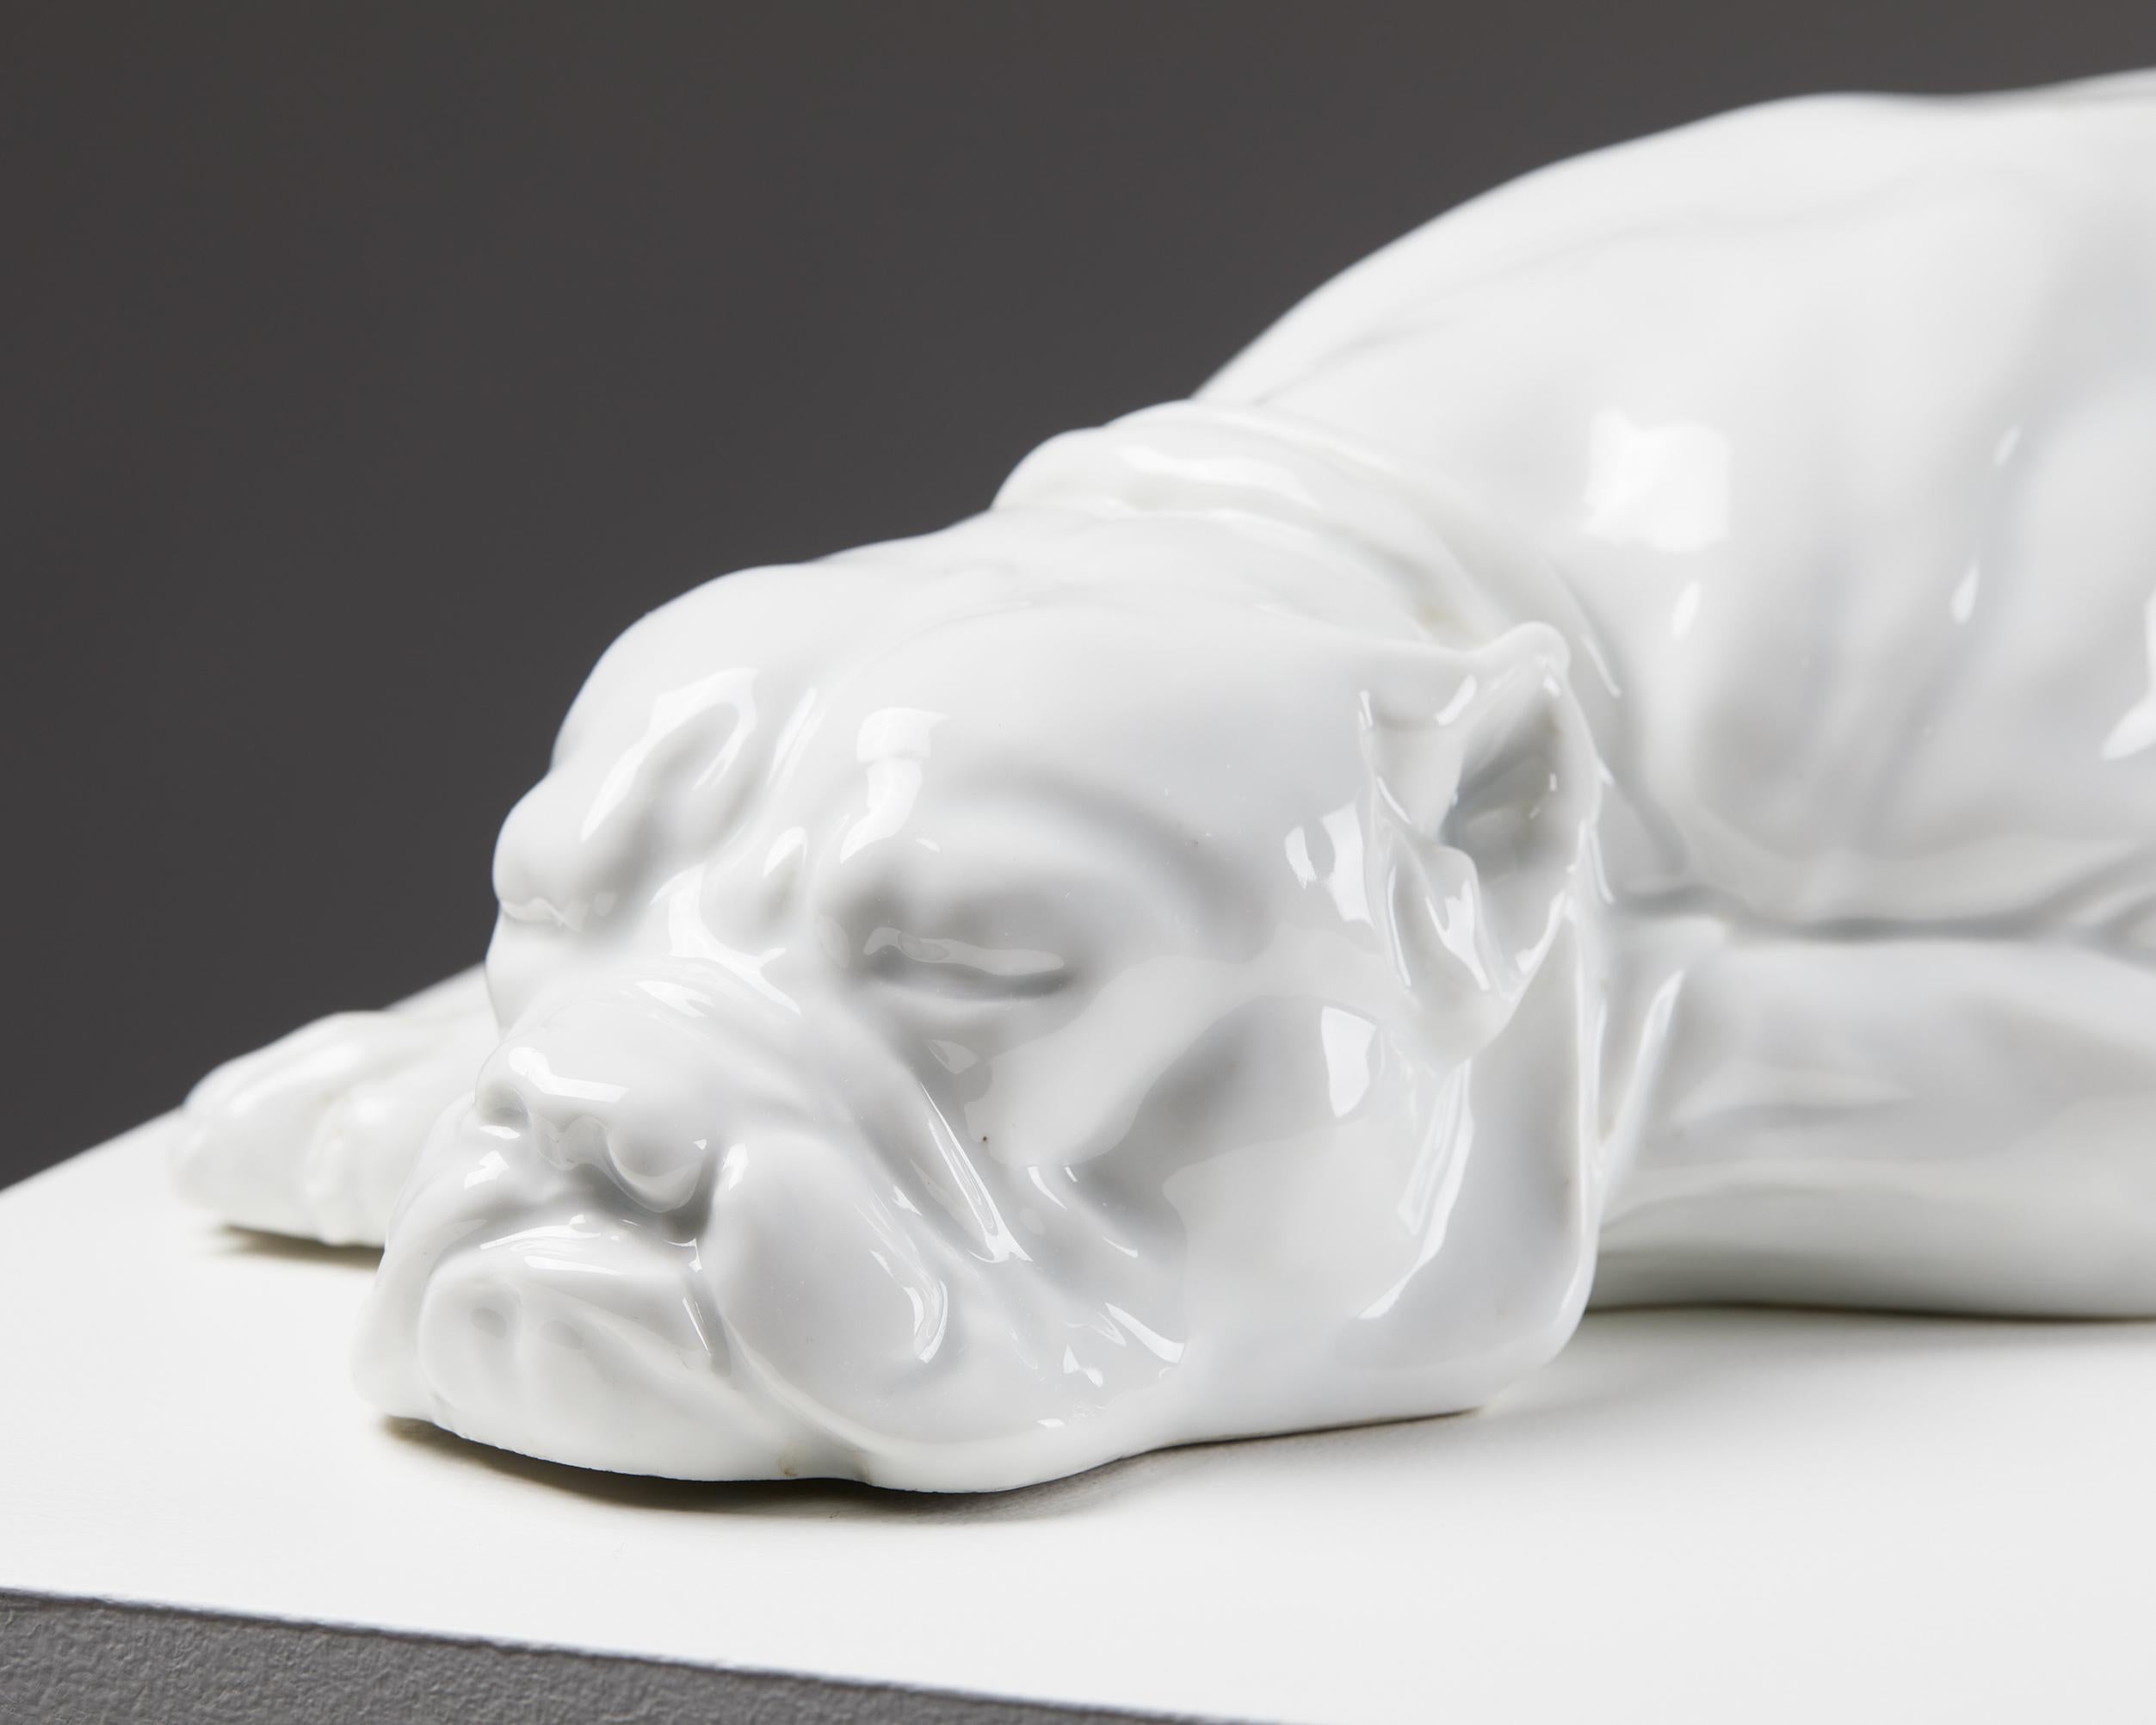 Porcelain Sculpture 'Sleeping Boxer' Designed by Thure Öberg for Arabia, Finland, 1910 For Sale